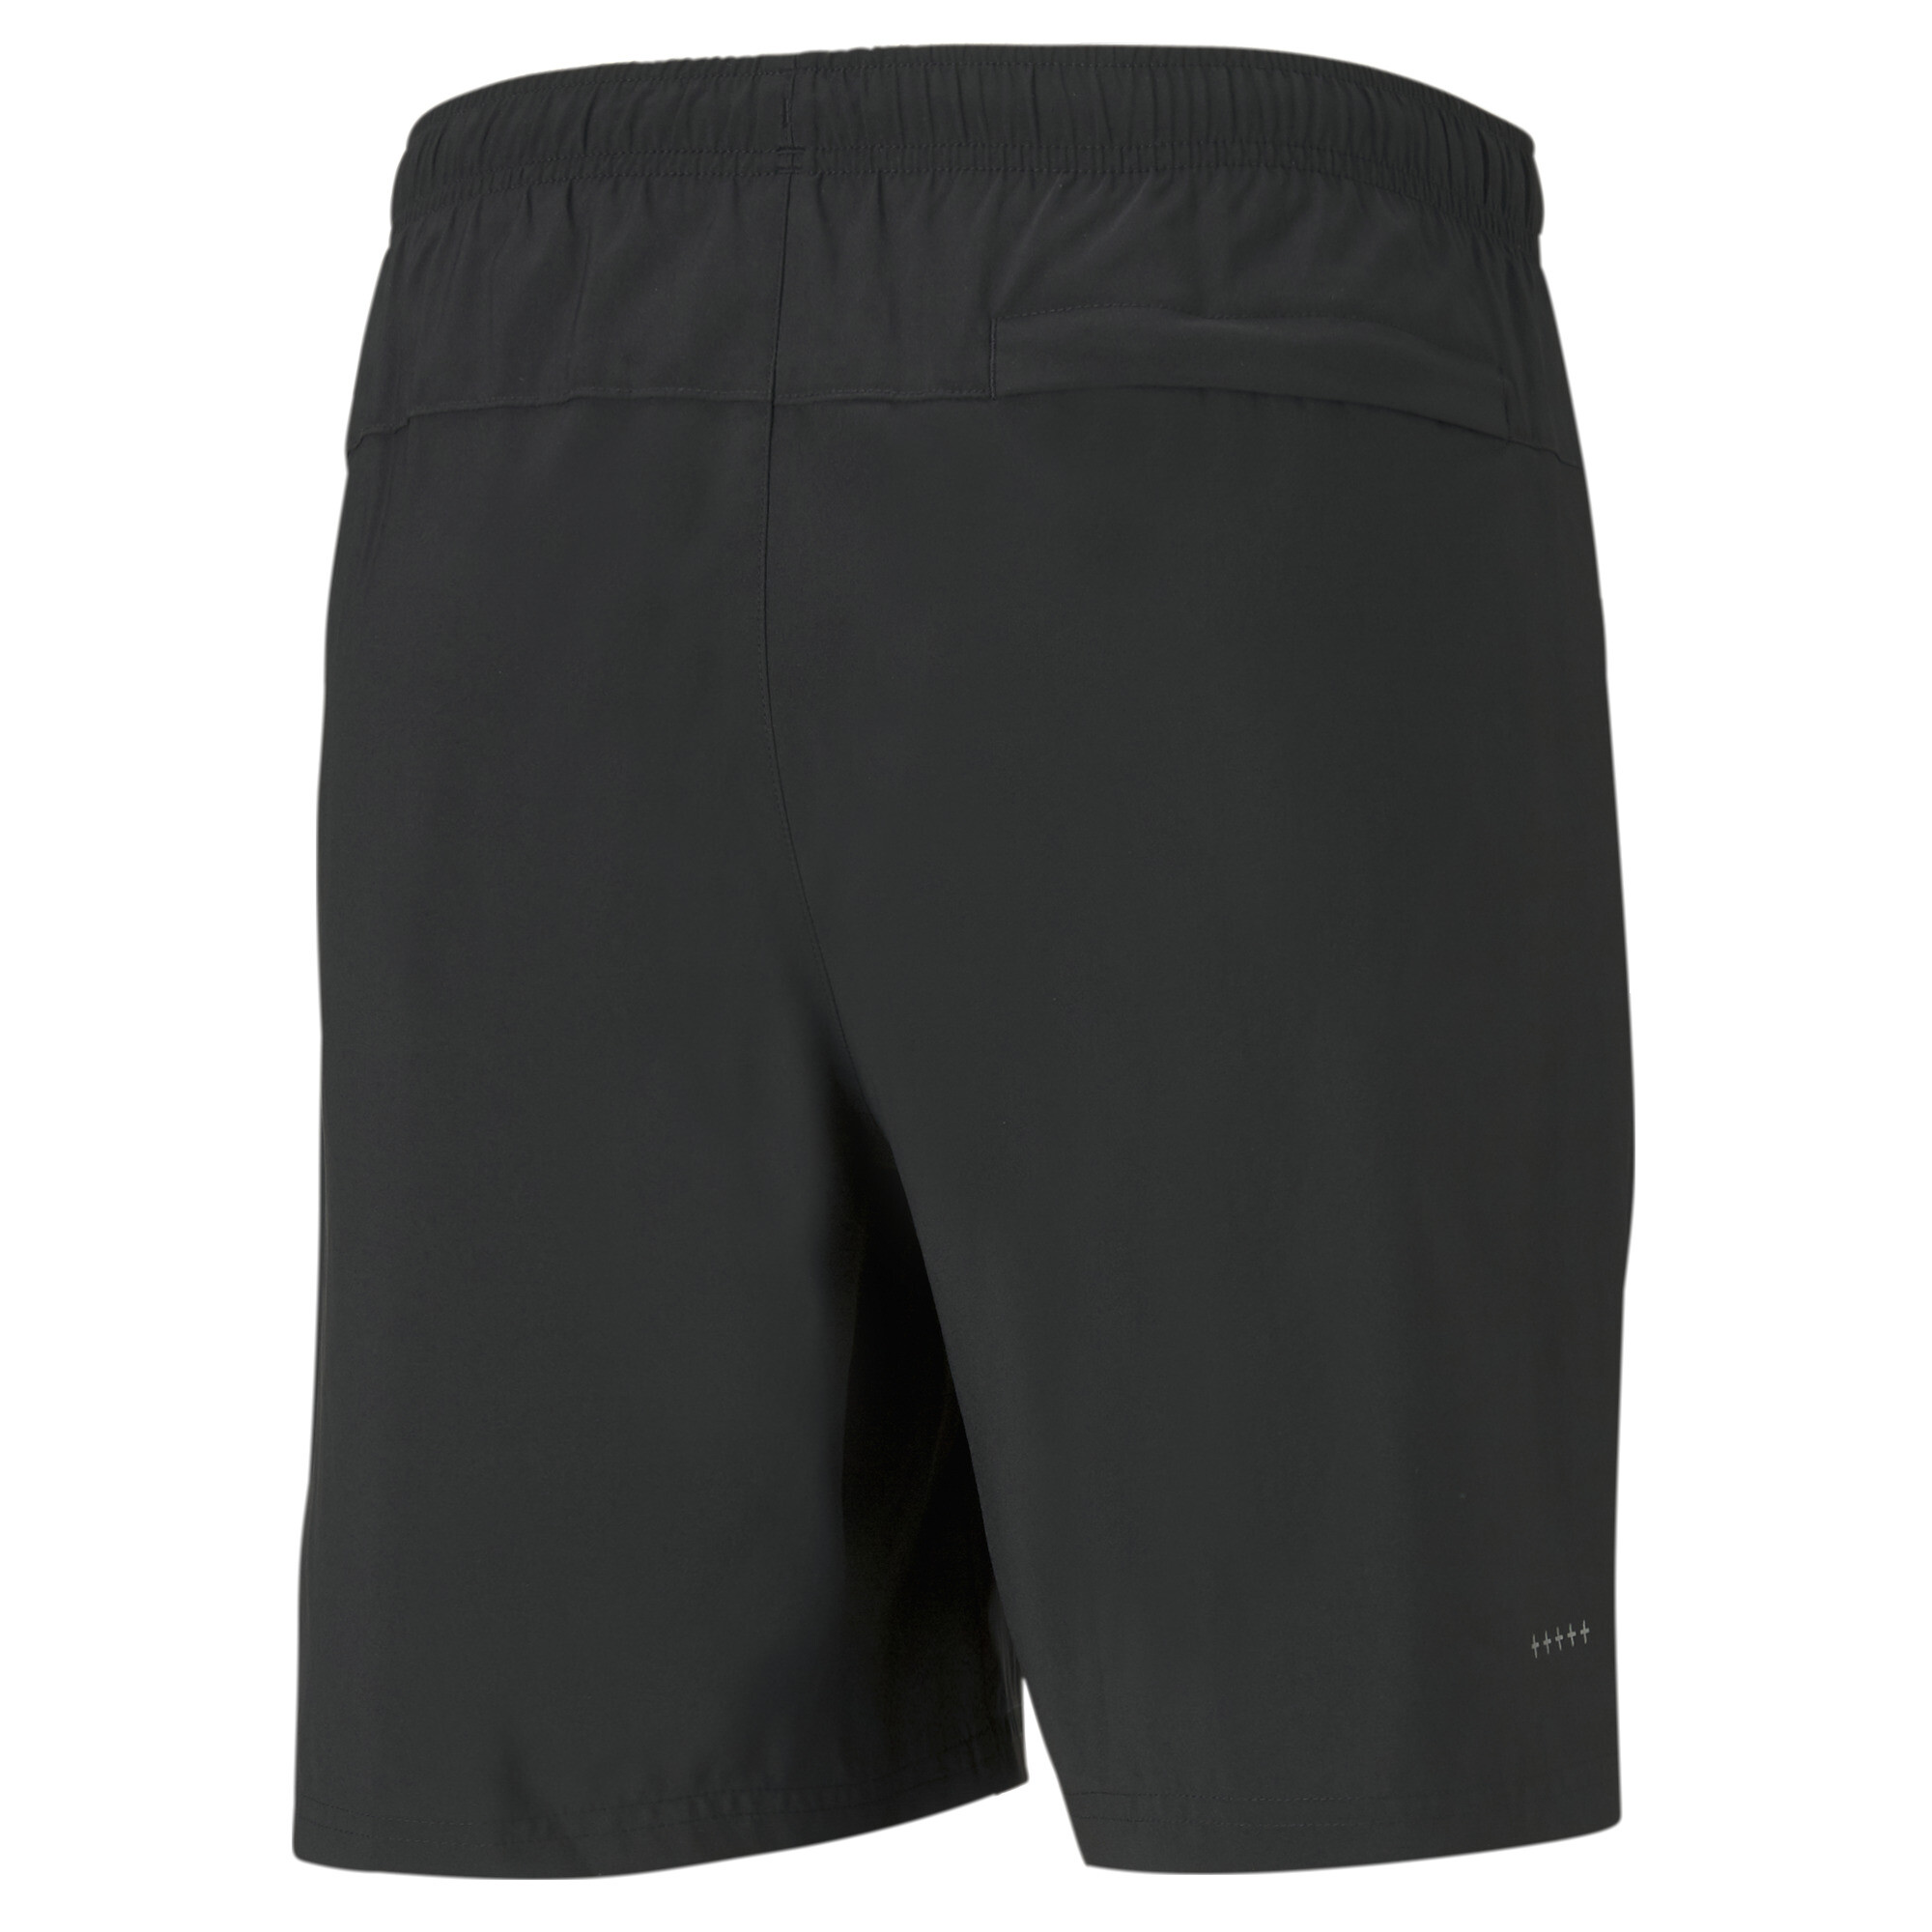 Men's PUMA Favourite Woven 7 Session Running Shorts In Black, Size XS